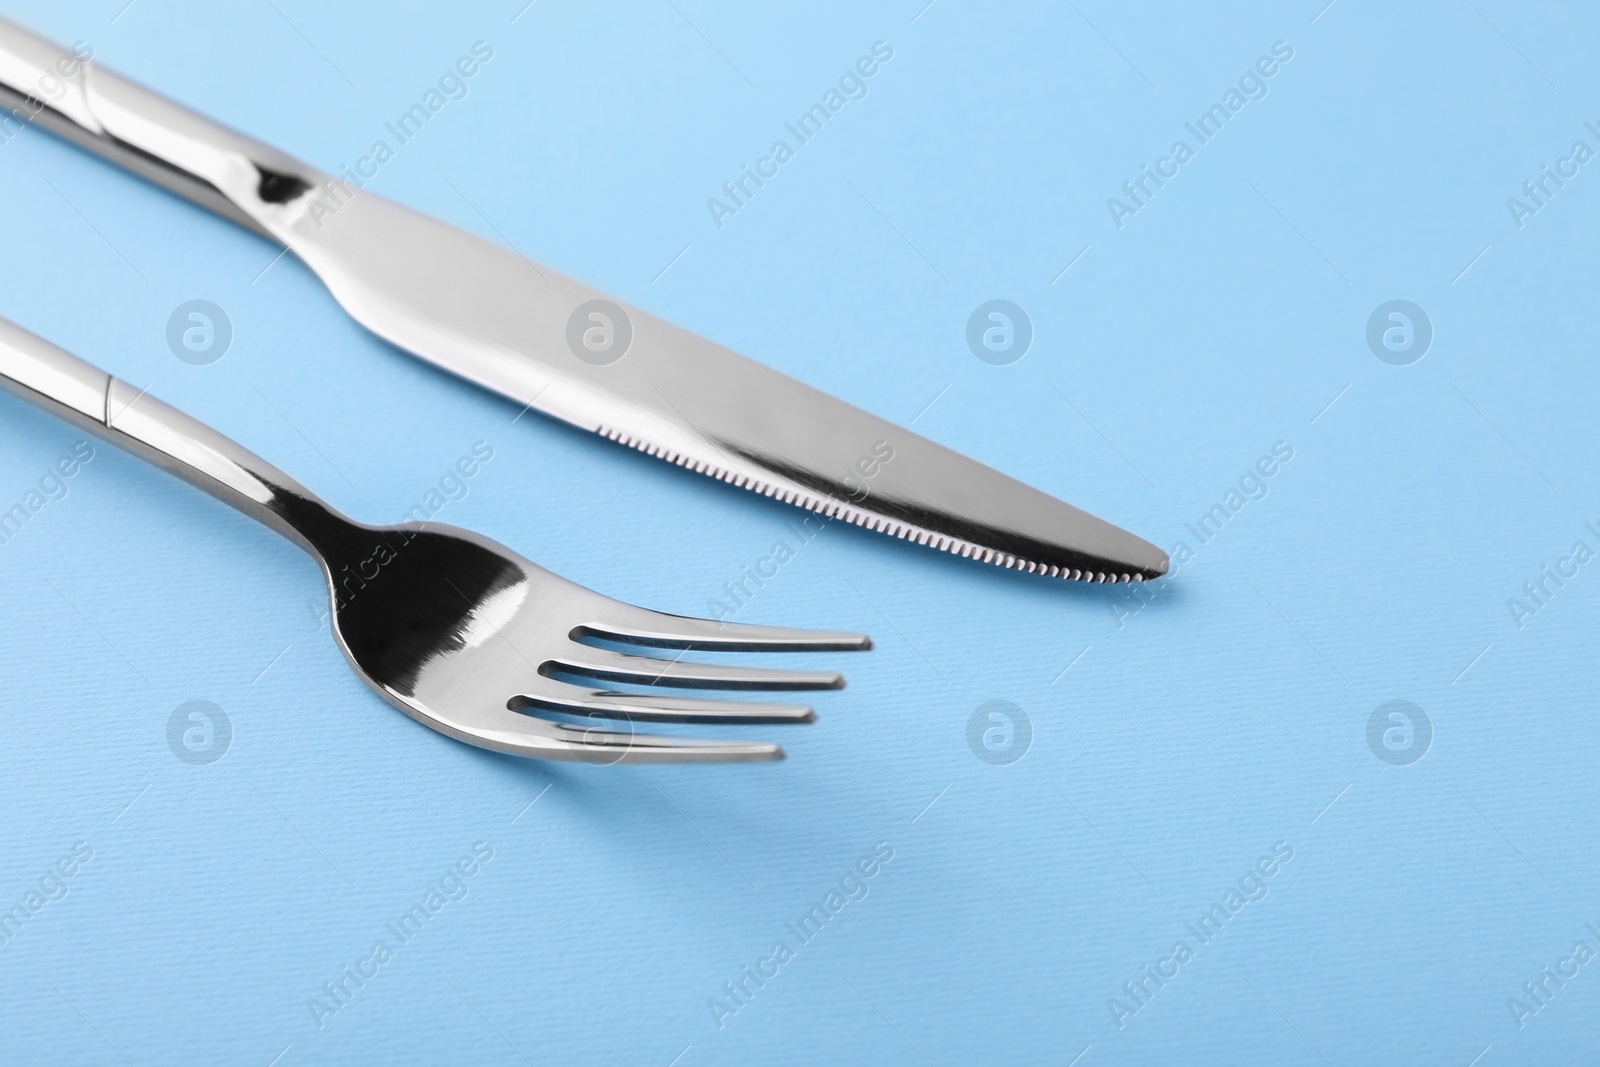 Photo of Stylish cutlery. Silver knife and fork on light blue background, closeup